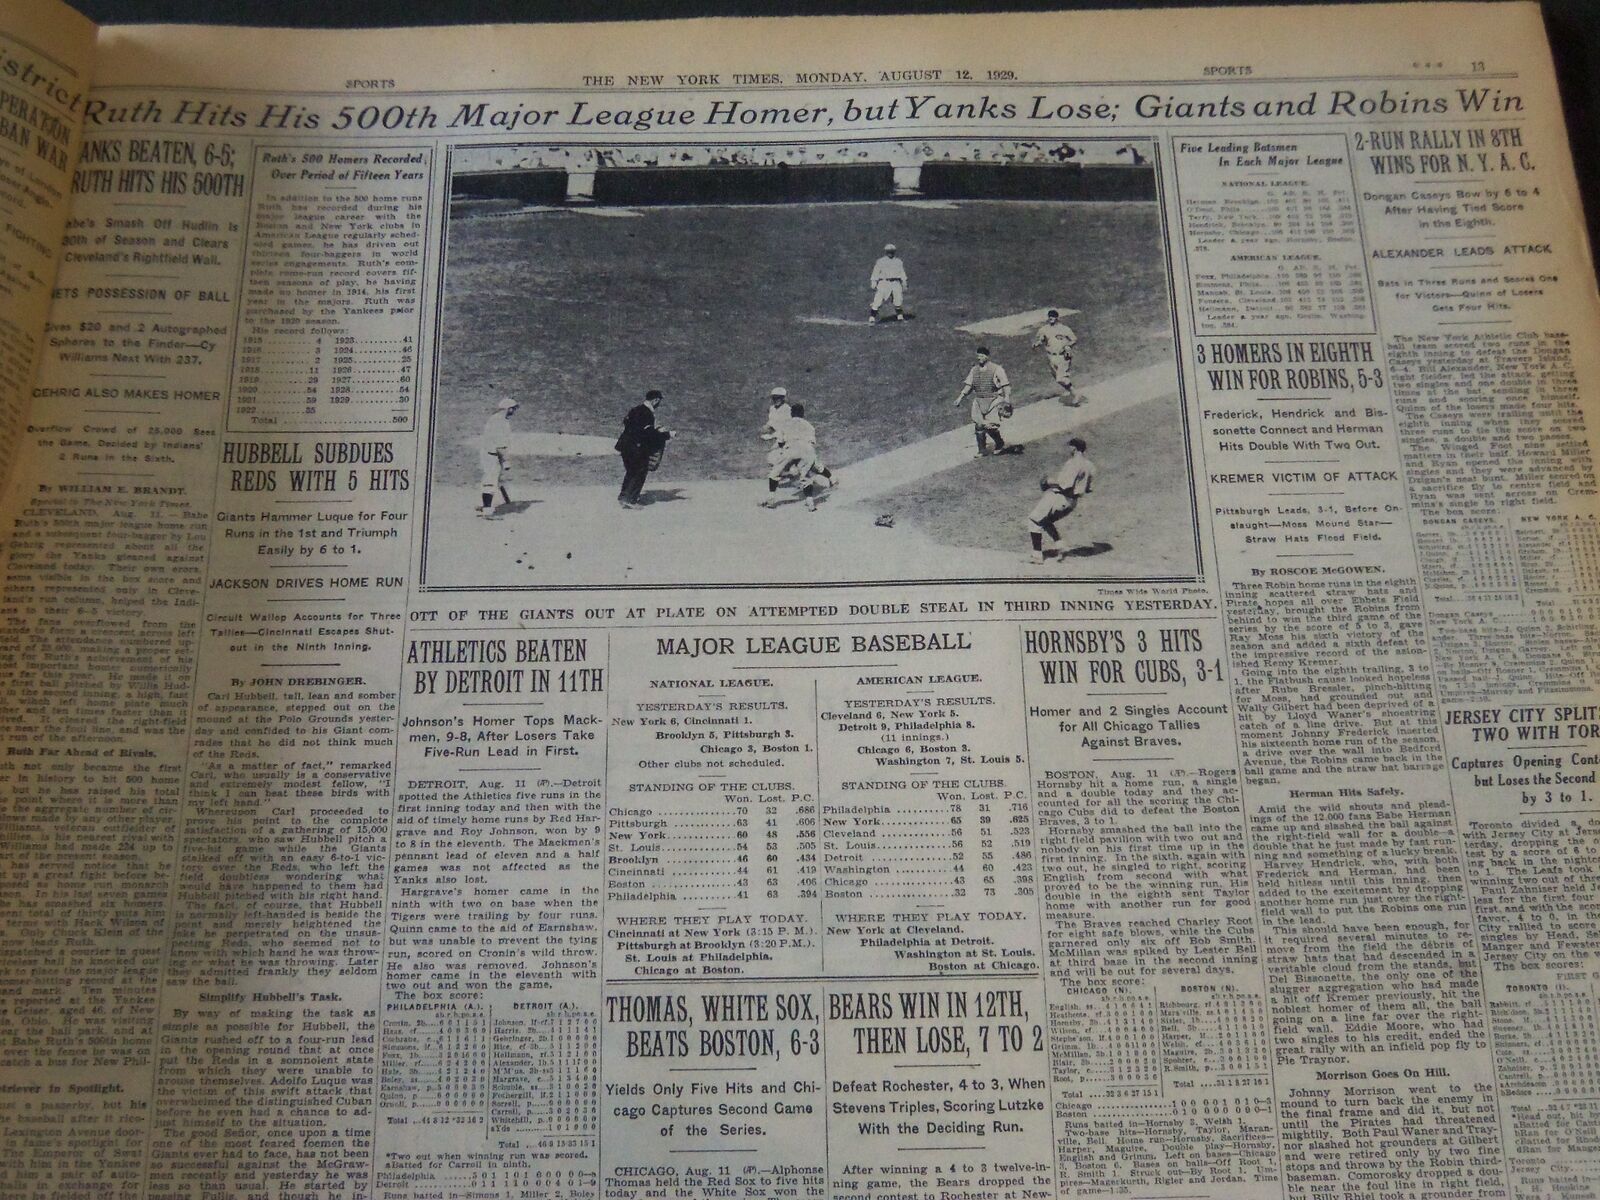 1929 AUGUST 12 NEW YORK TIMES - RUTH HITS HIS 500TH MAJOR LEAGUE HOMER - NT 6638